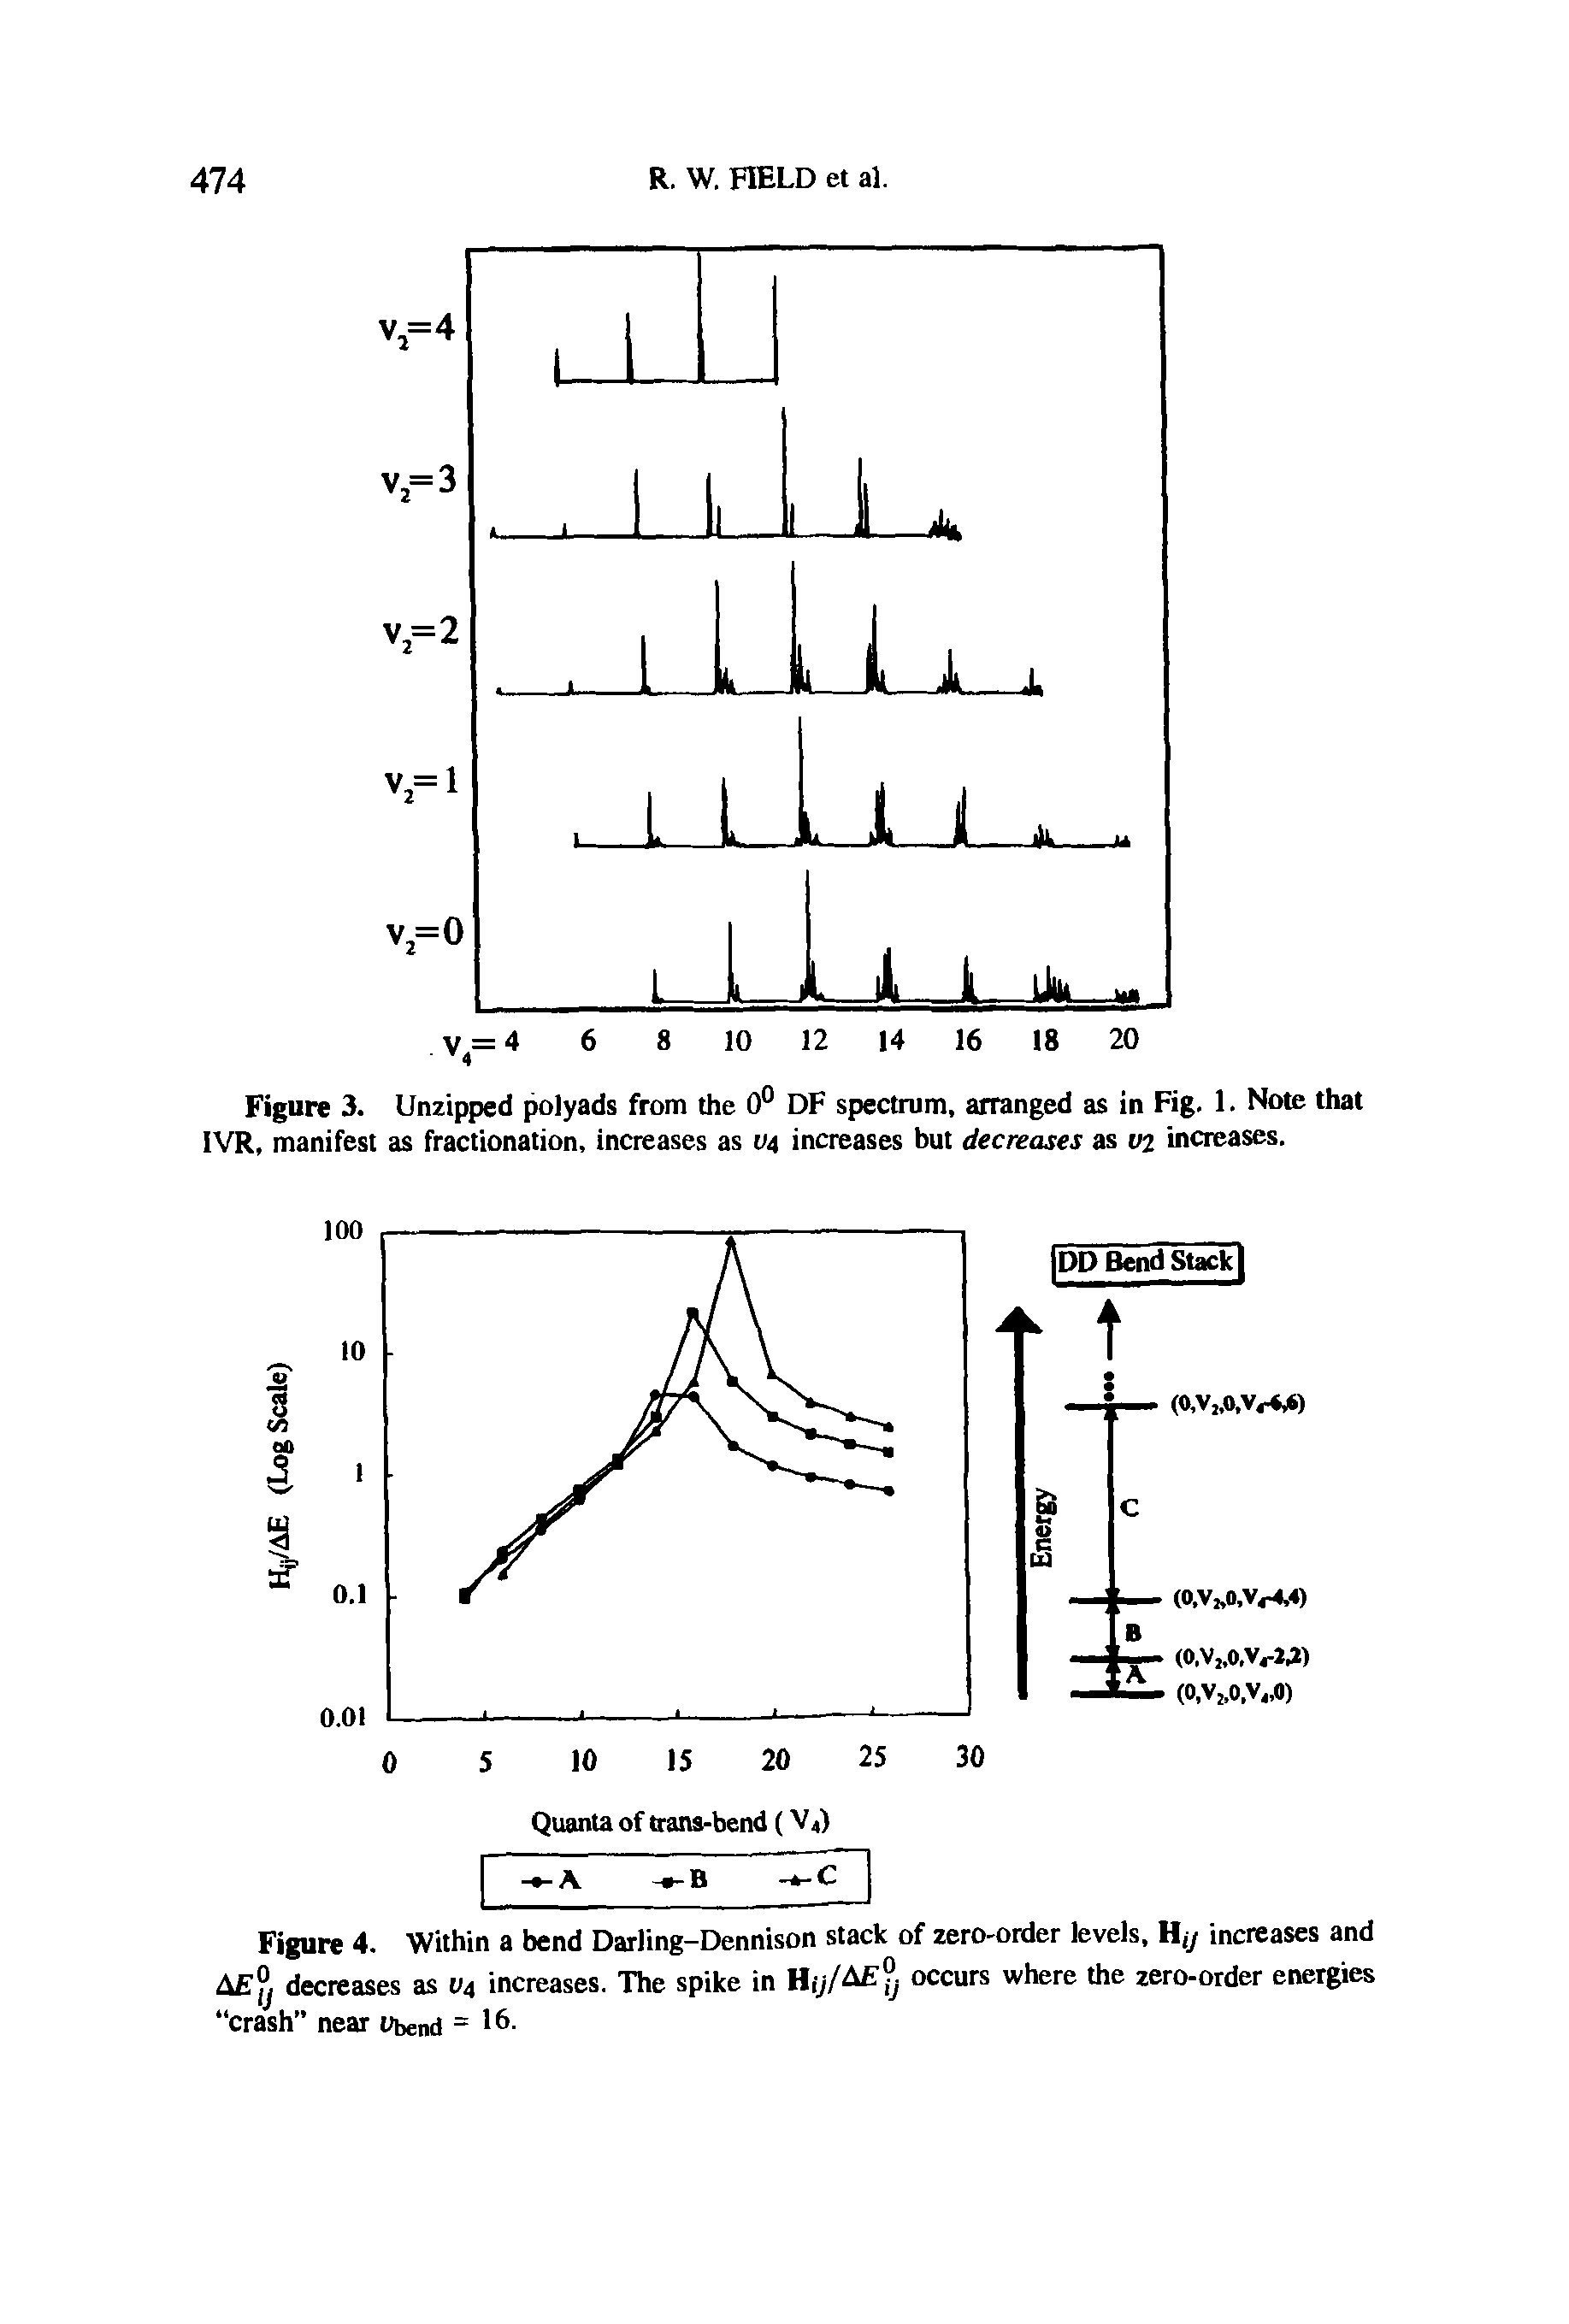 Figure 3. Unzipped polyads from the 0° DF spectrum, arranged as in Fig. 1. Note that IVR, manifest as fractionation, increases as vs increases but decreases as V2 increases.